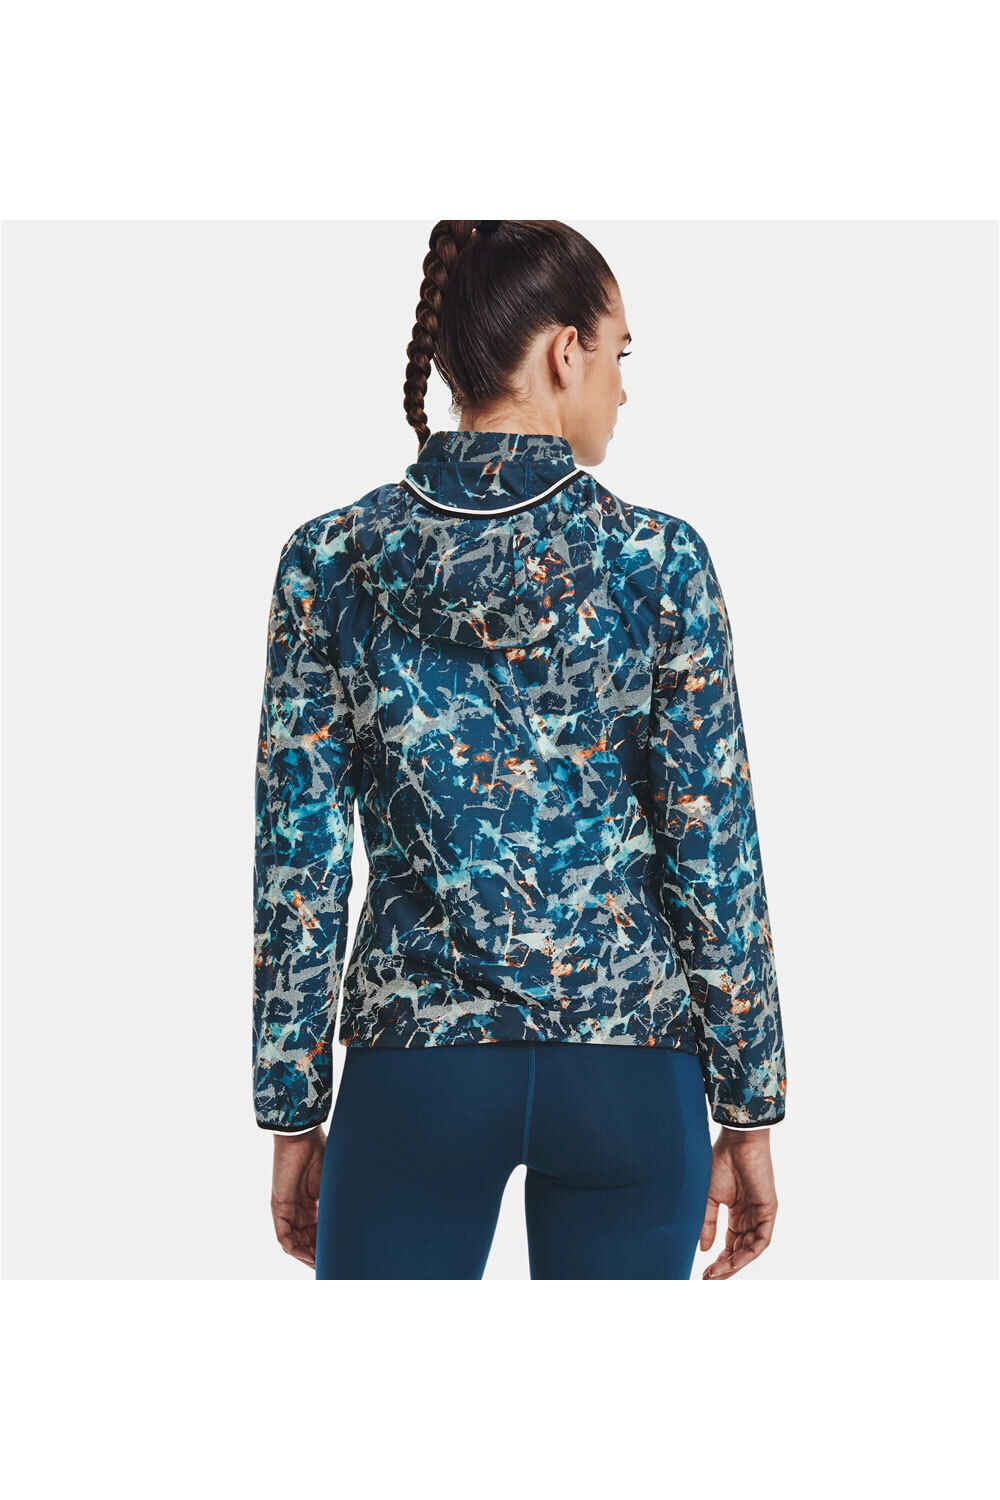 Under Armour Storm OutRun The Cold Jacket Women petrol blue/black